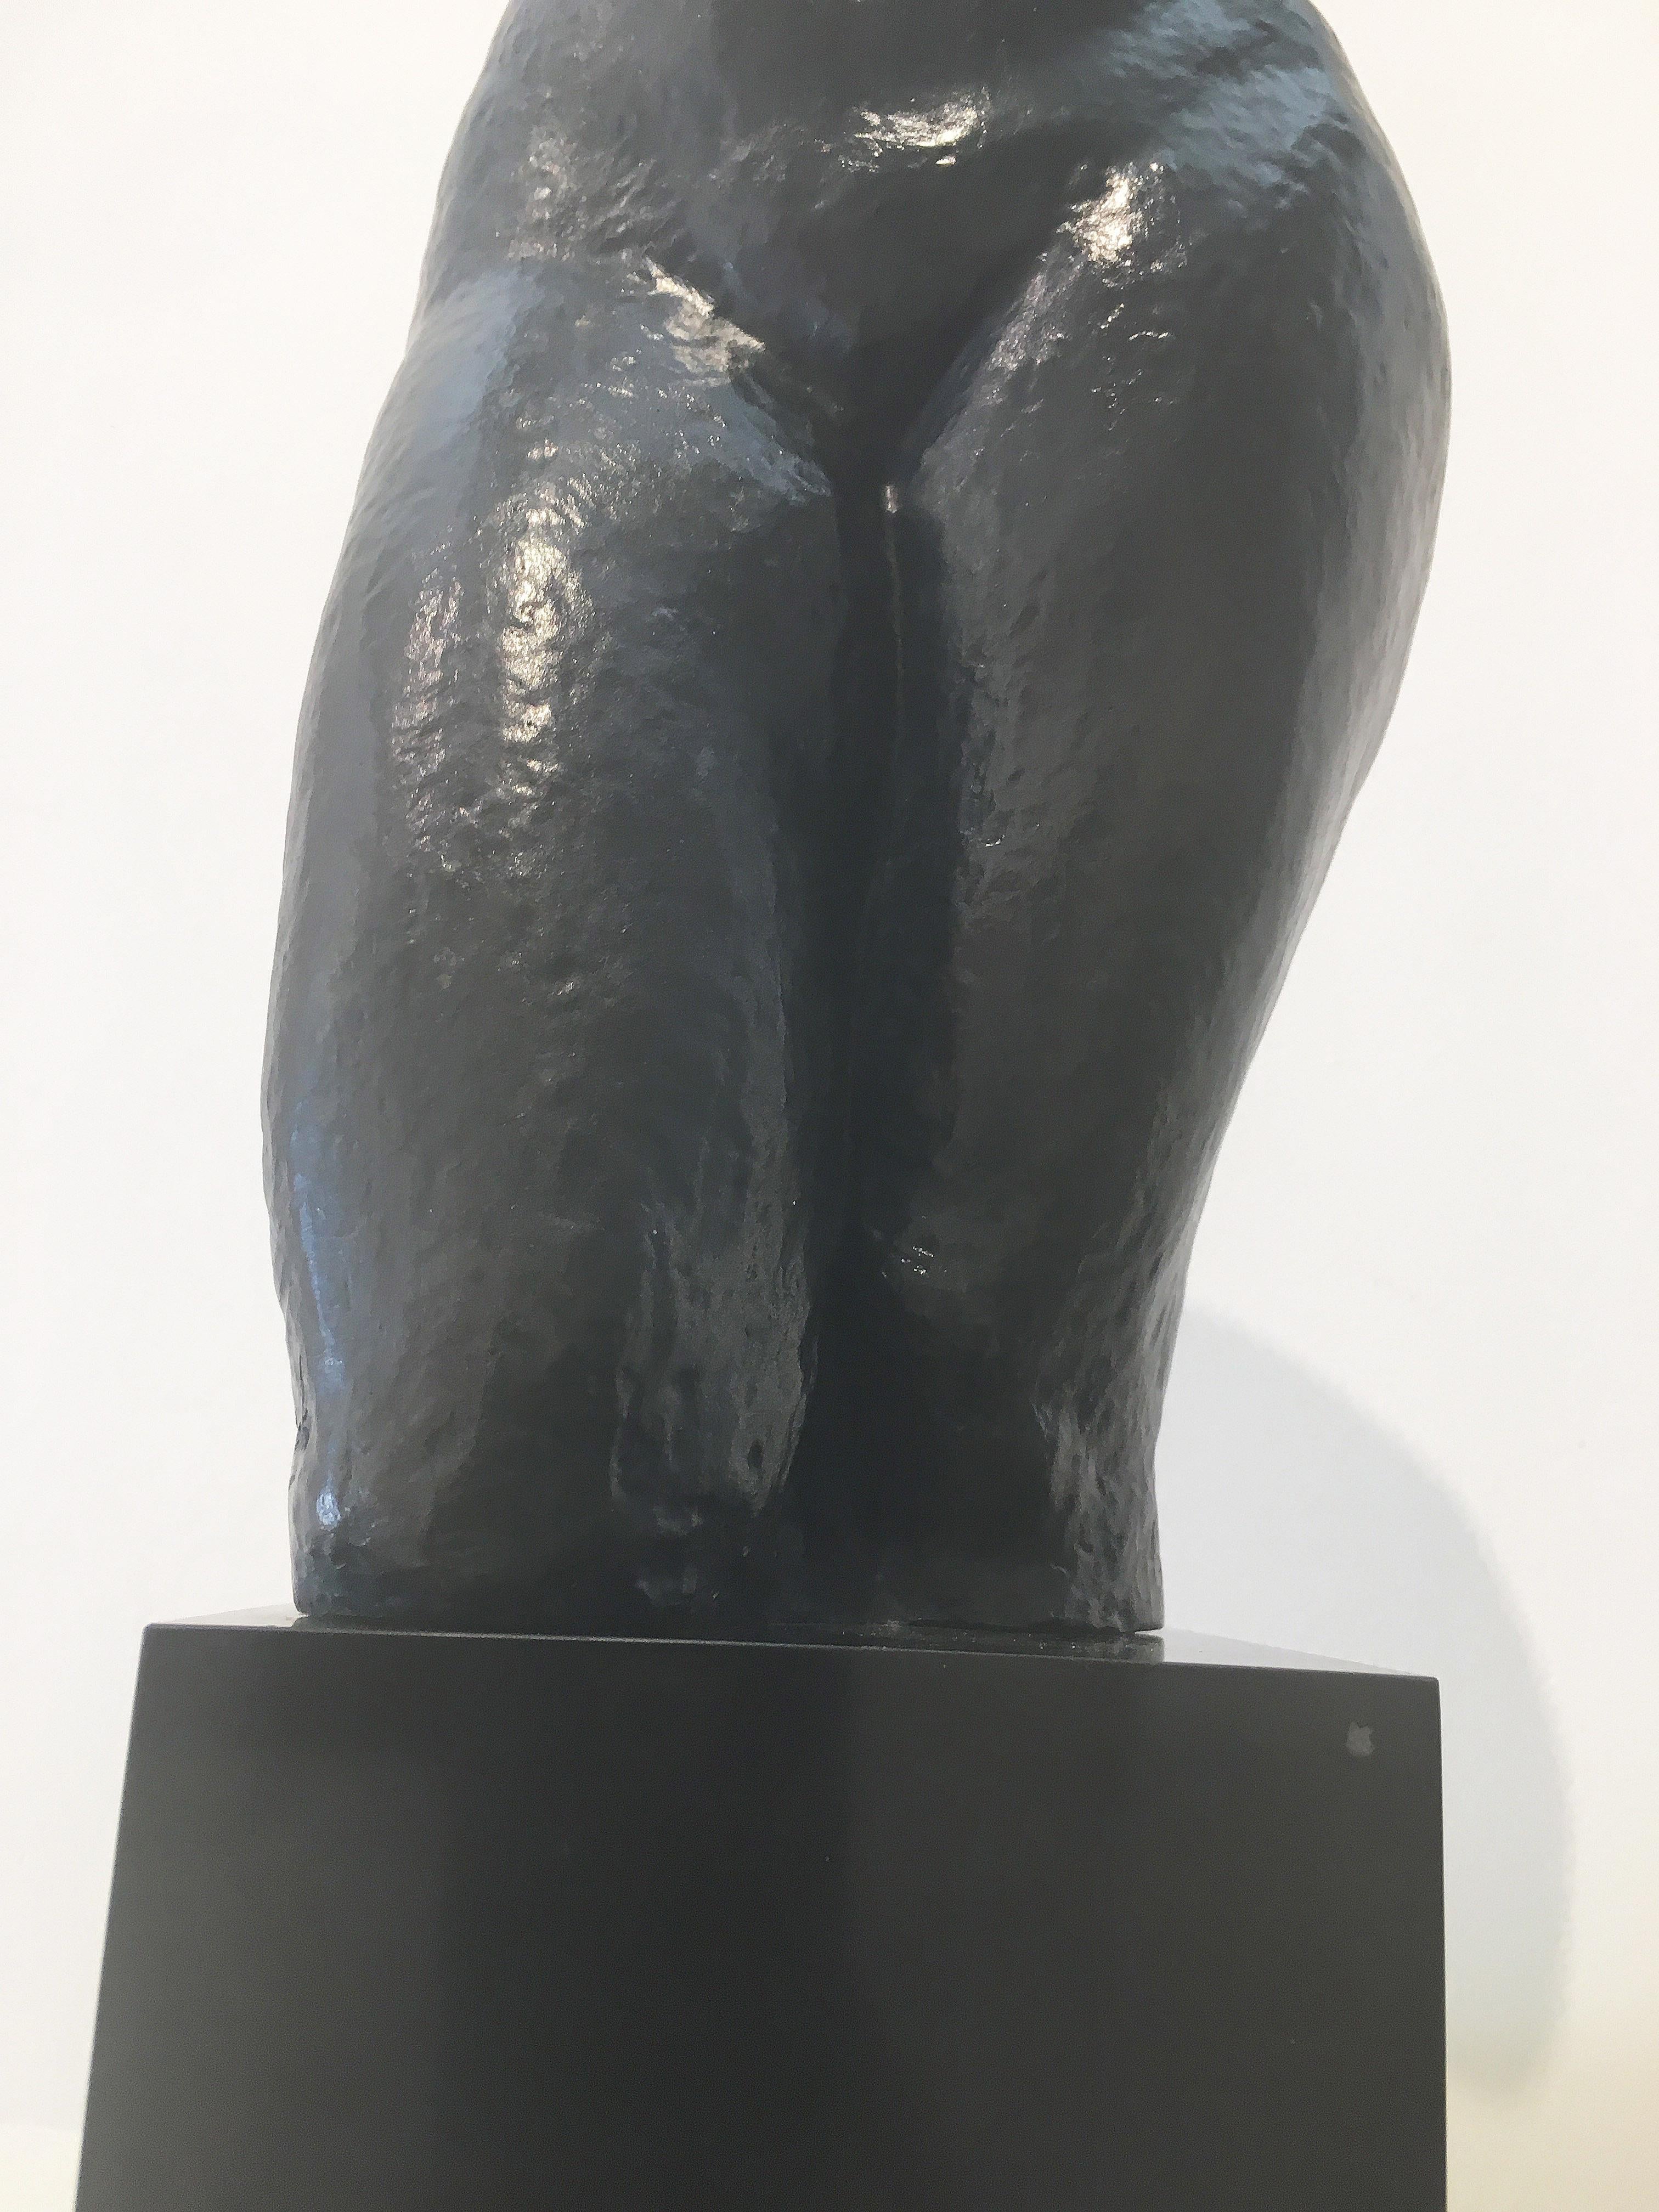 'Lulu Lapalue' 1931 by French sculptor, Robert Wlérick. Bronze, Ed. 7 of 10, 22.75 x 4.75 x 8 in. This bronze sculpture depicts a woman's torso with a black patina. The sculpture sits on a black marble cube base and is signed and numbered 'R.